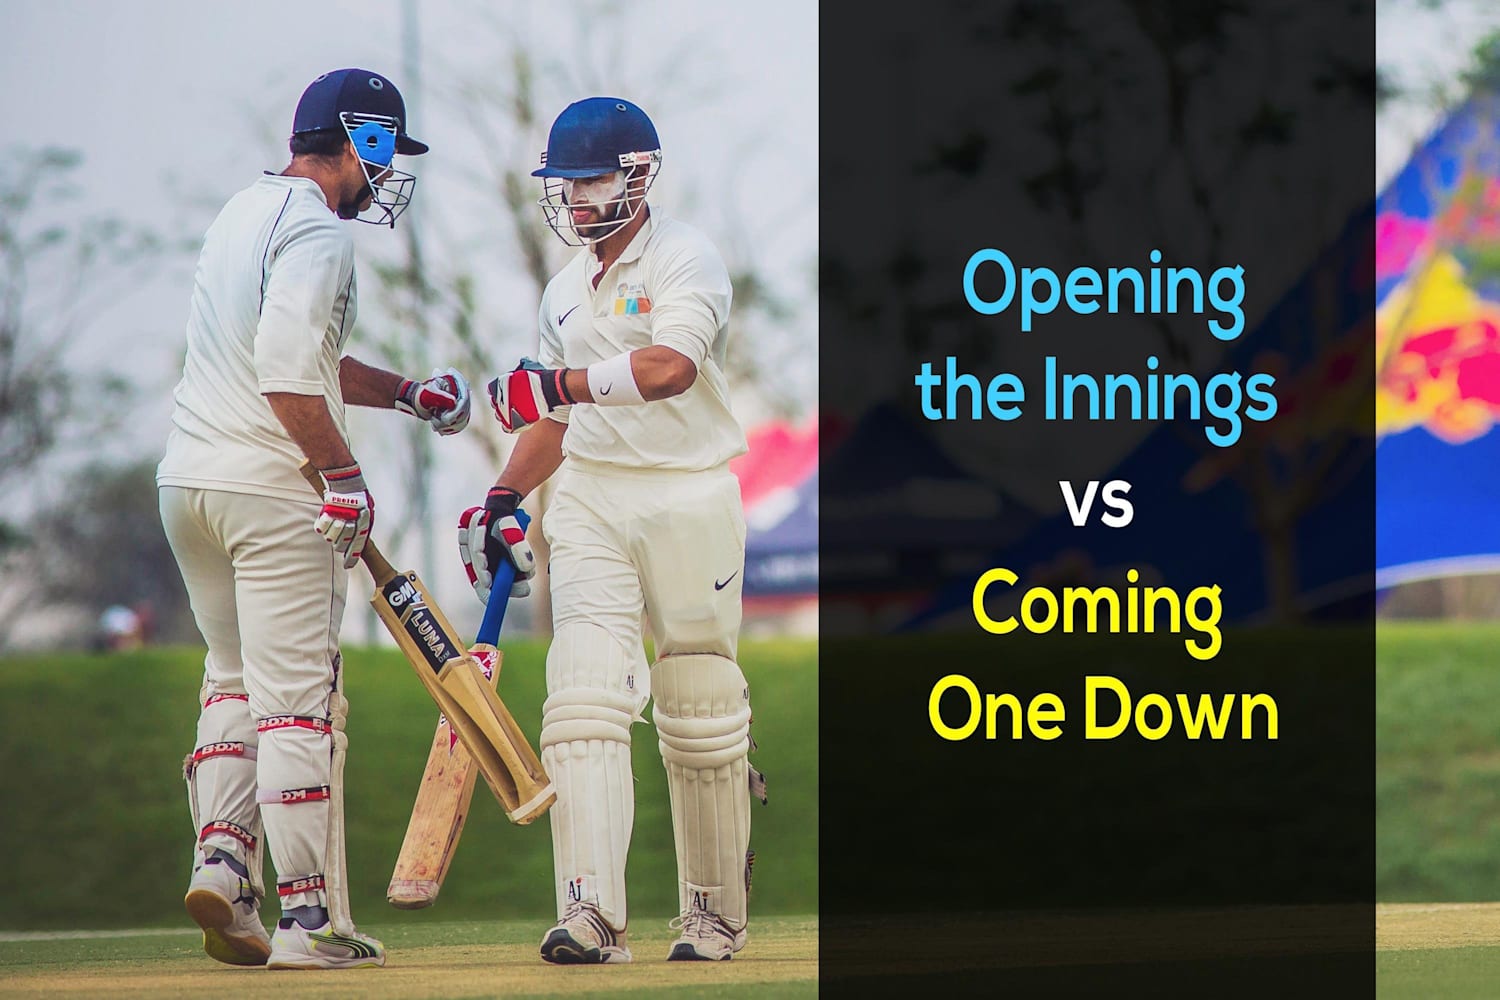 Opening batsman vs. one down: What is more important